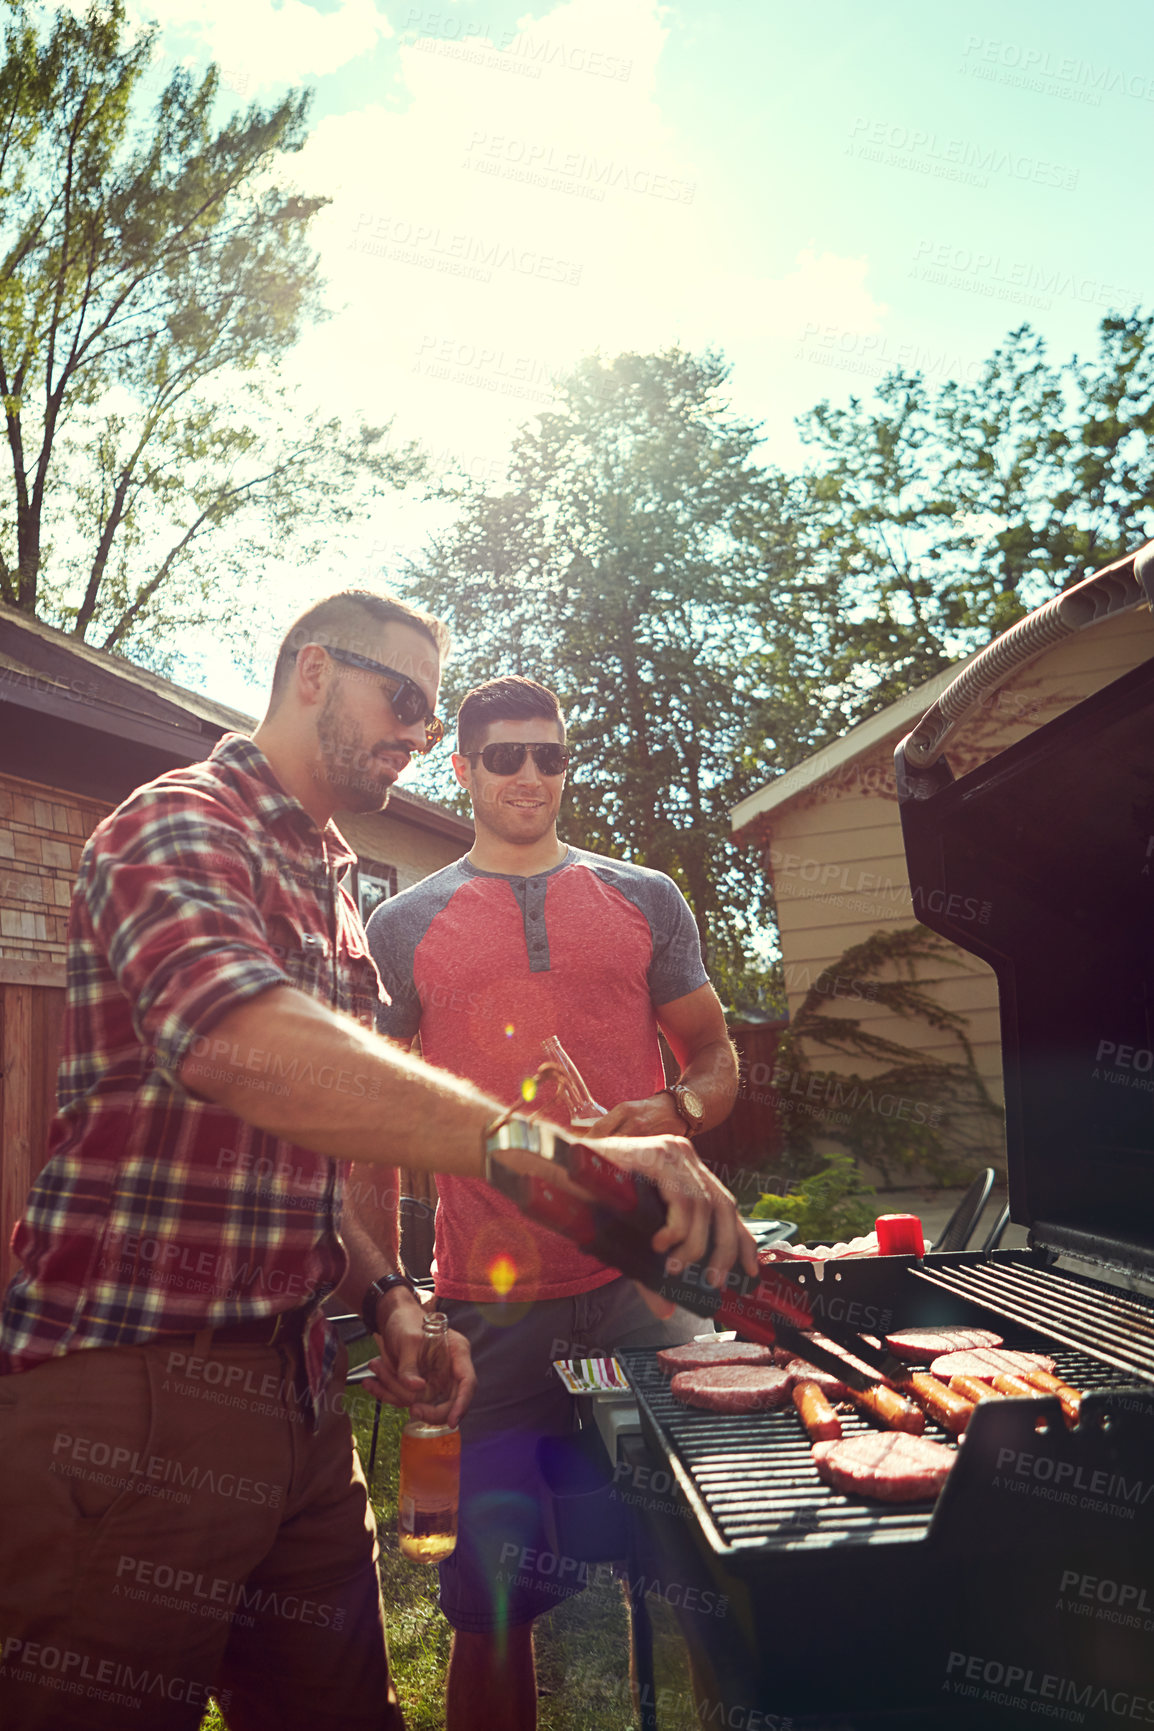 Buy stock photo Shot of friends having a barbecue outside